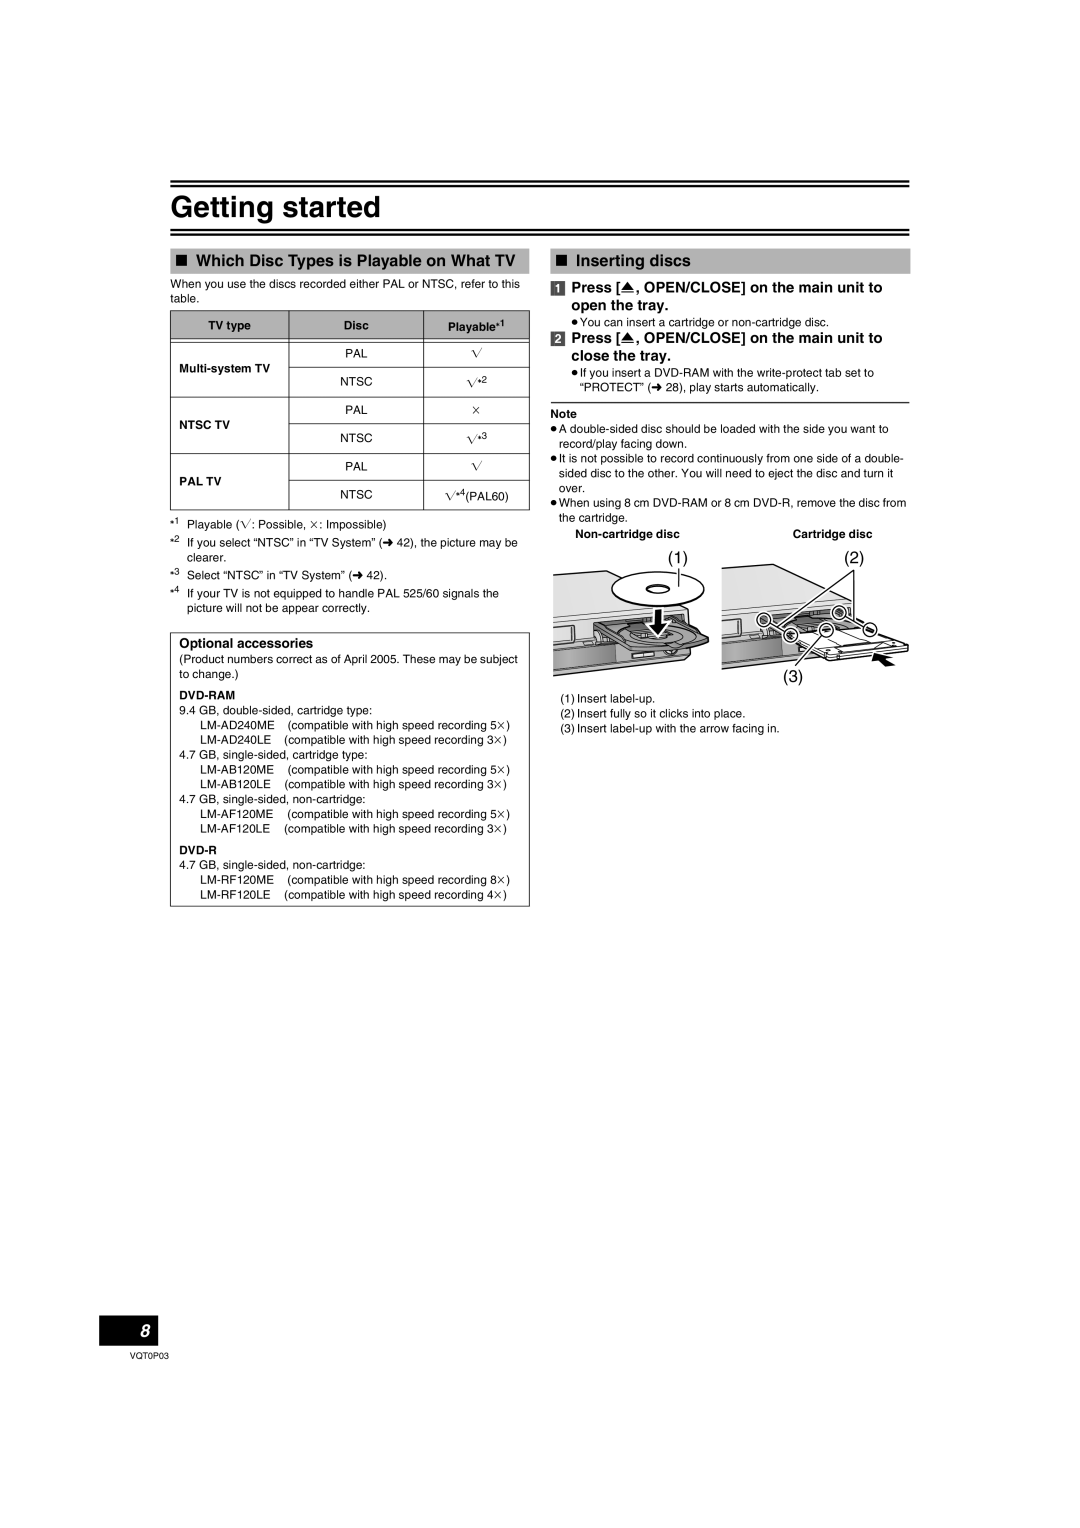 Panasonic DMR-ES30V operating instructions Which Disc Types is Playable on What TV, Inserting discs, Optional accessories 